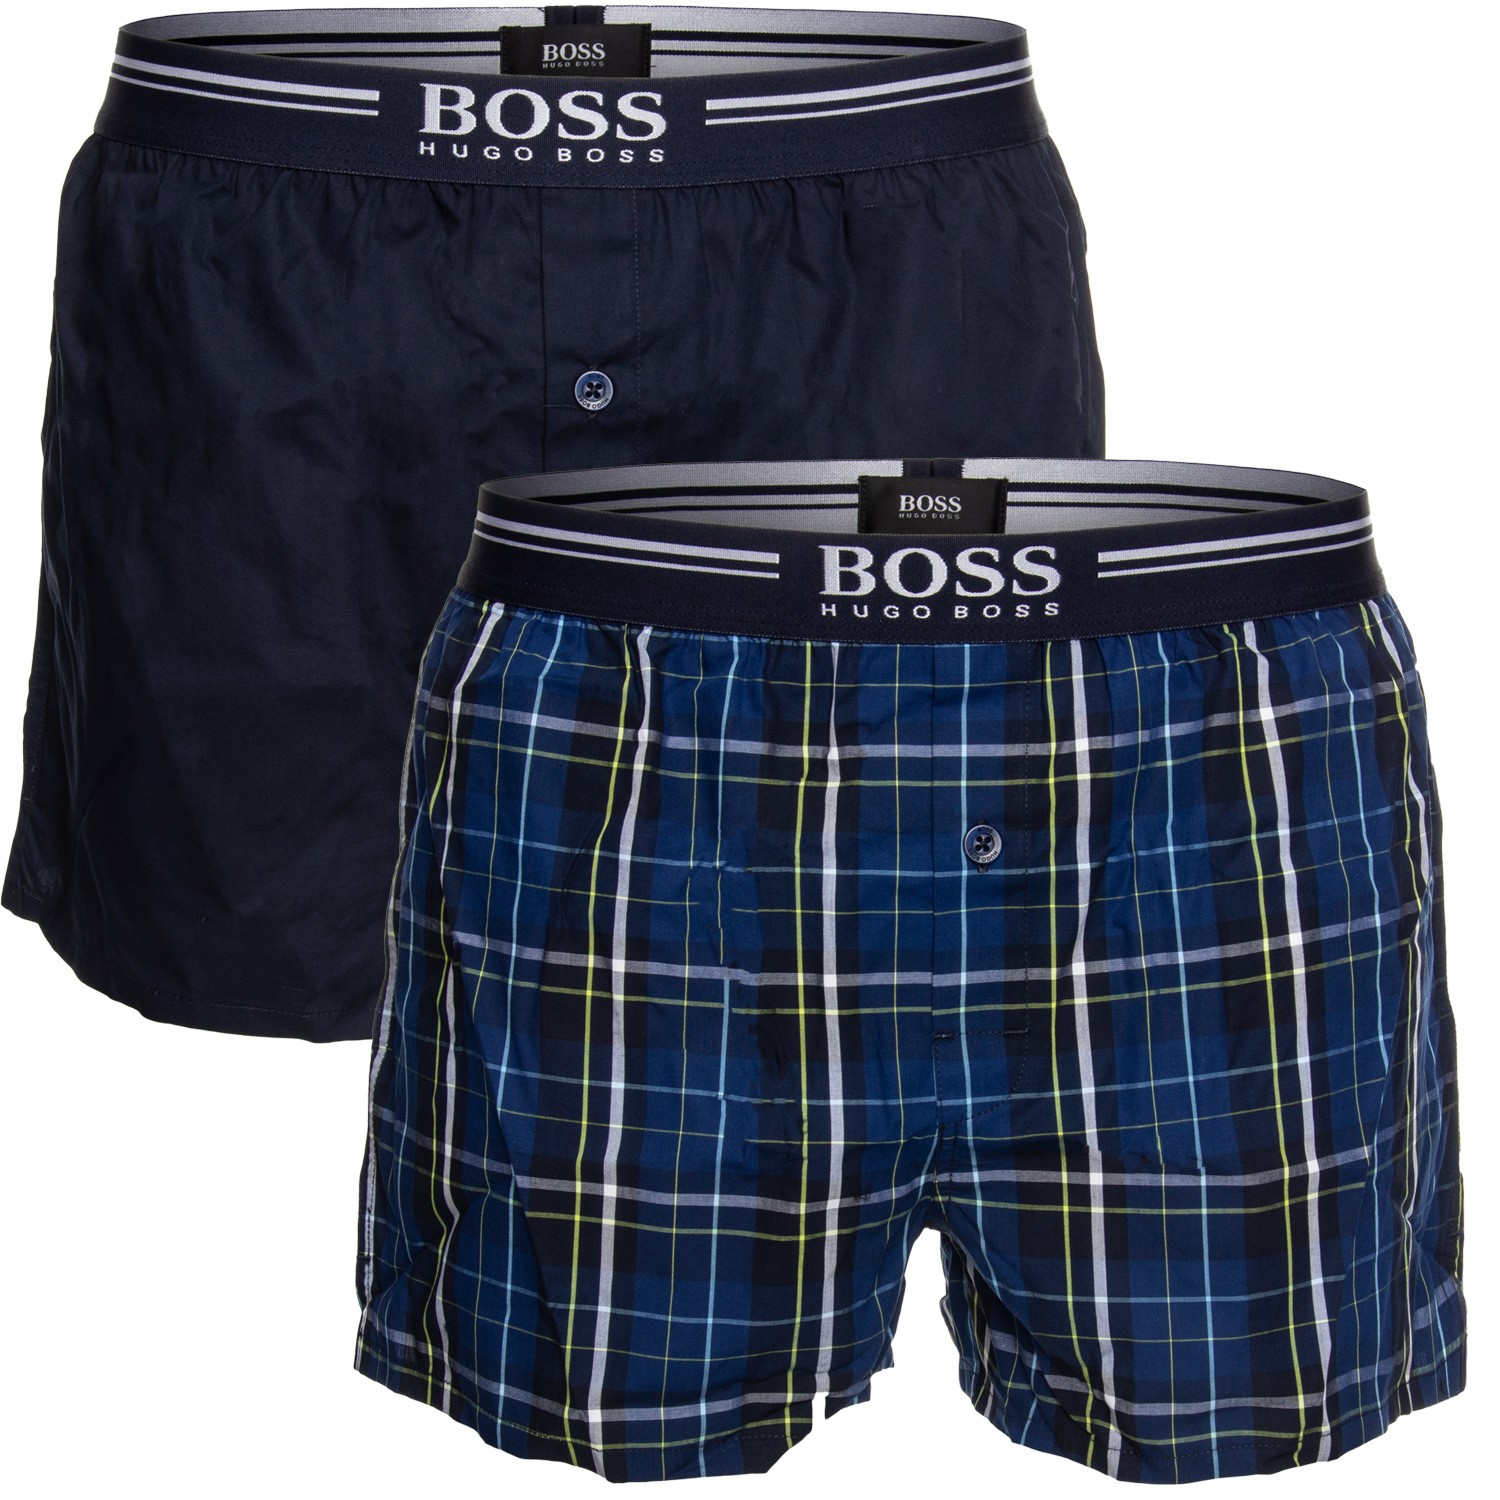 BOSS Woven Cotton Boxer Shorts With Fly